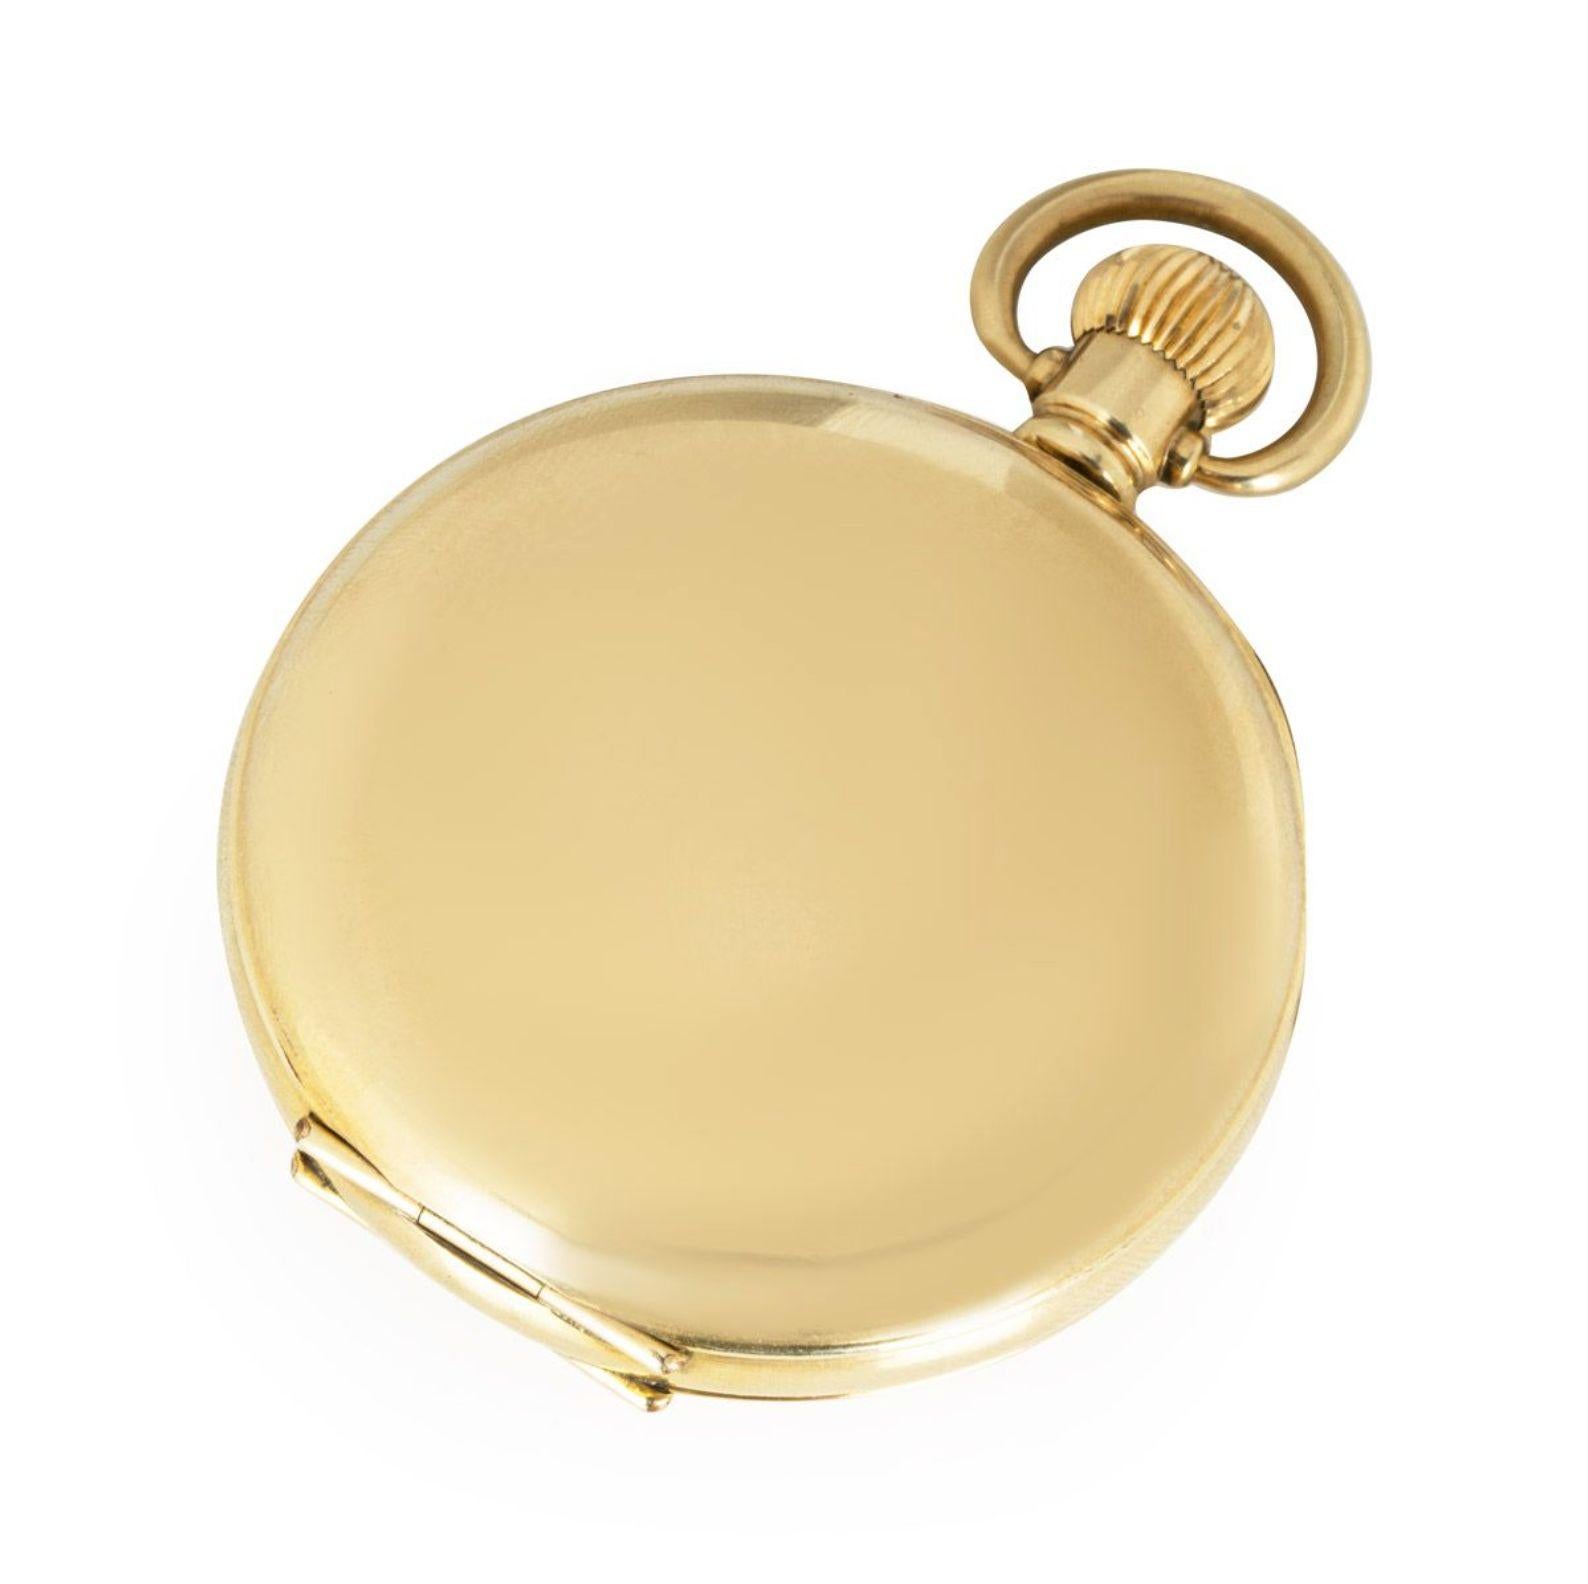 Antique Rolex Gold Plated Keyless Lever Half Hunter Pocket Watch C1920s In Excellent Condition For Sale In London, GB